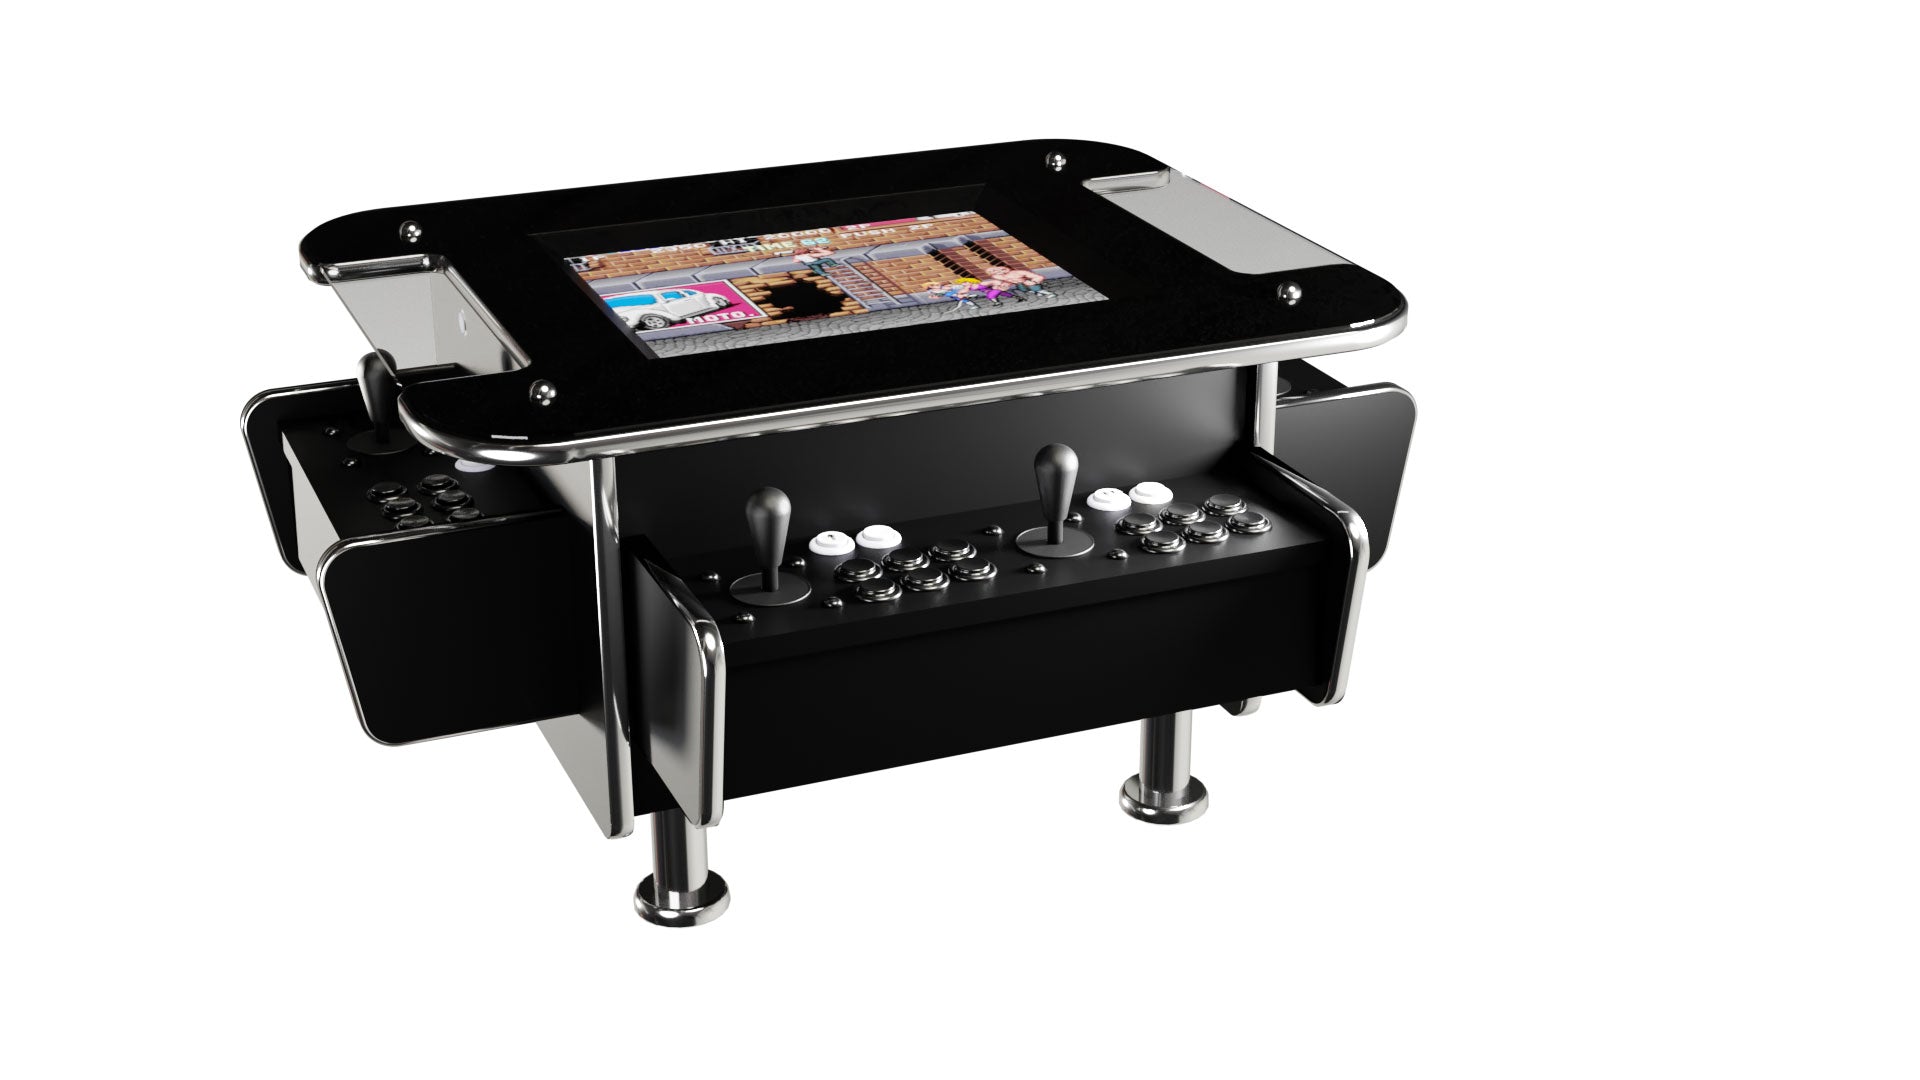 GT-1500 Coffee Table Machine to the left